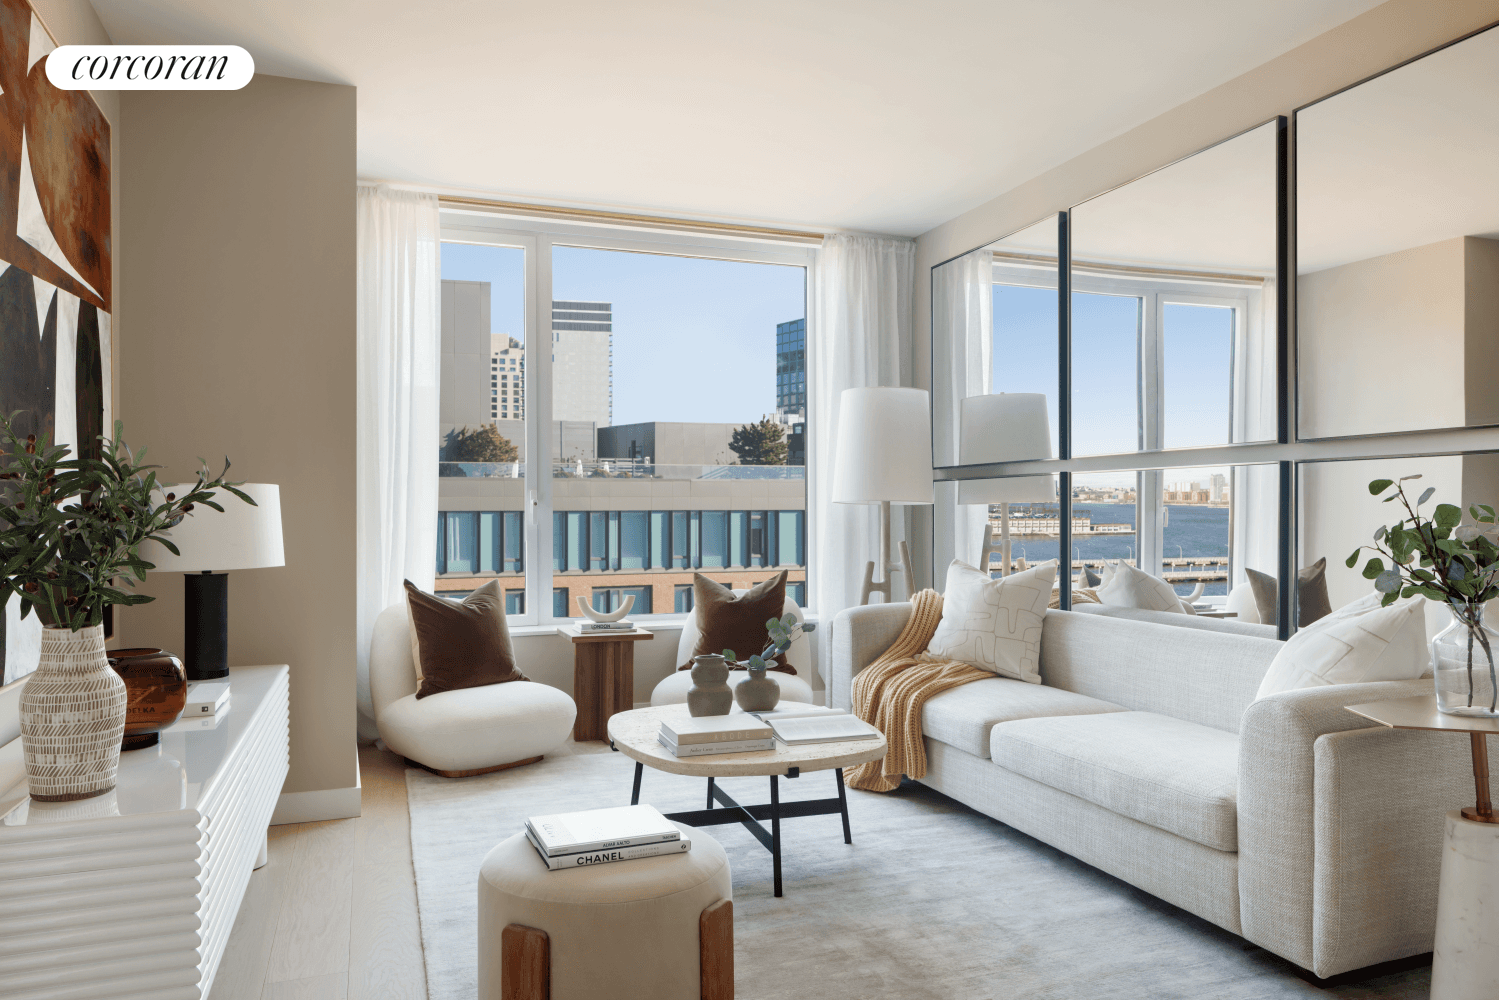 IMMEDIATE OCCUPANCY450 WASHINGTON RESIDENCES BY RELATED ON THE TRIBECA WATERFRONT.